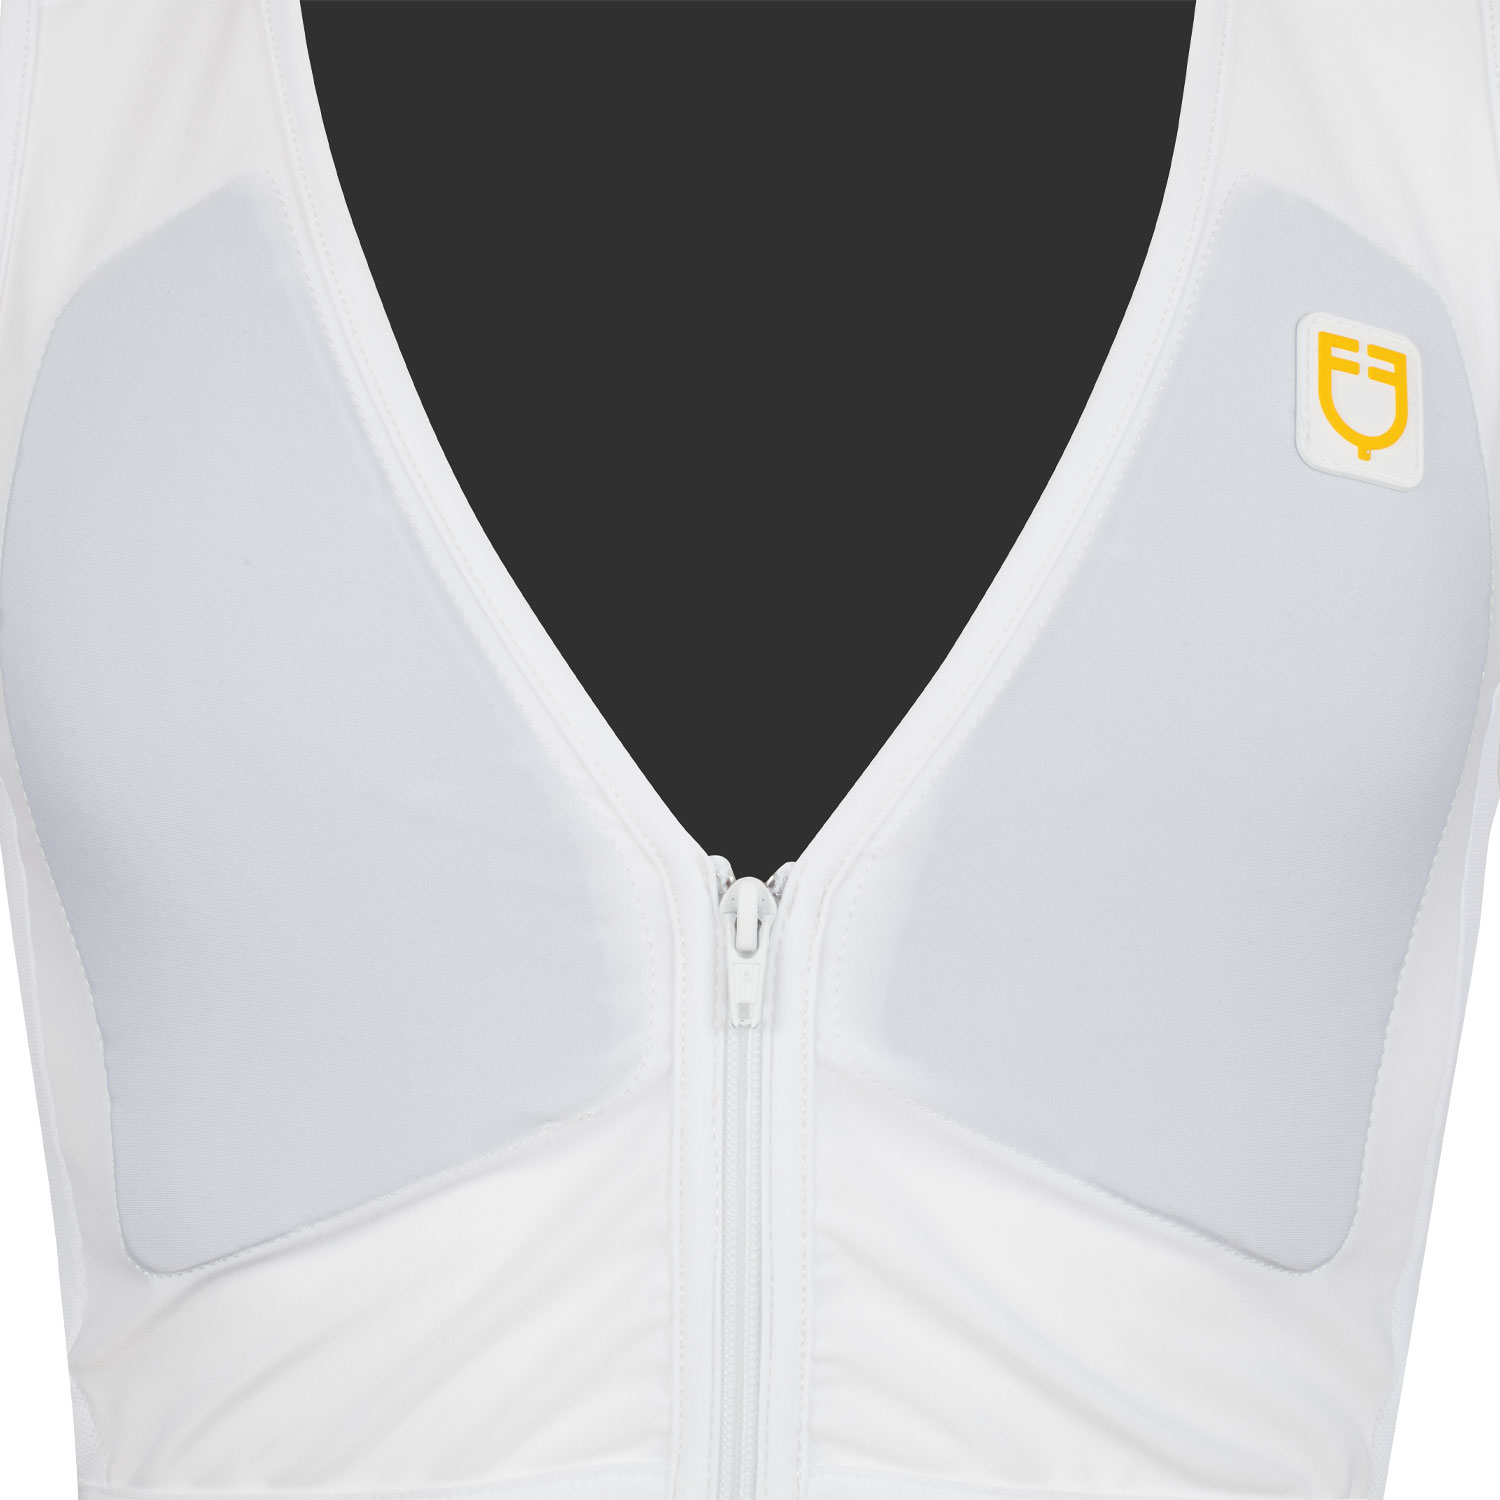 Protector Comptetition Vest